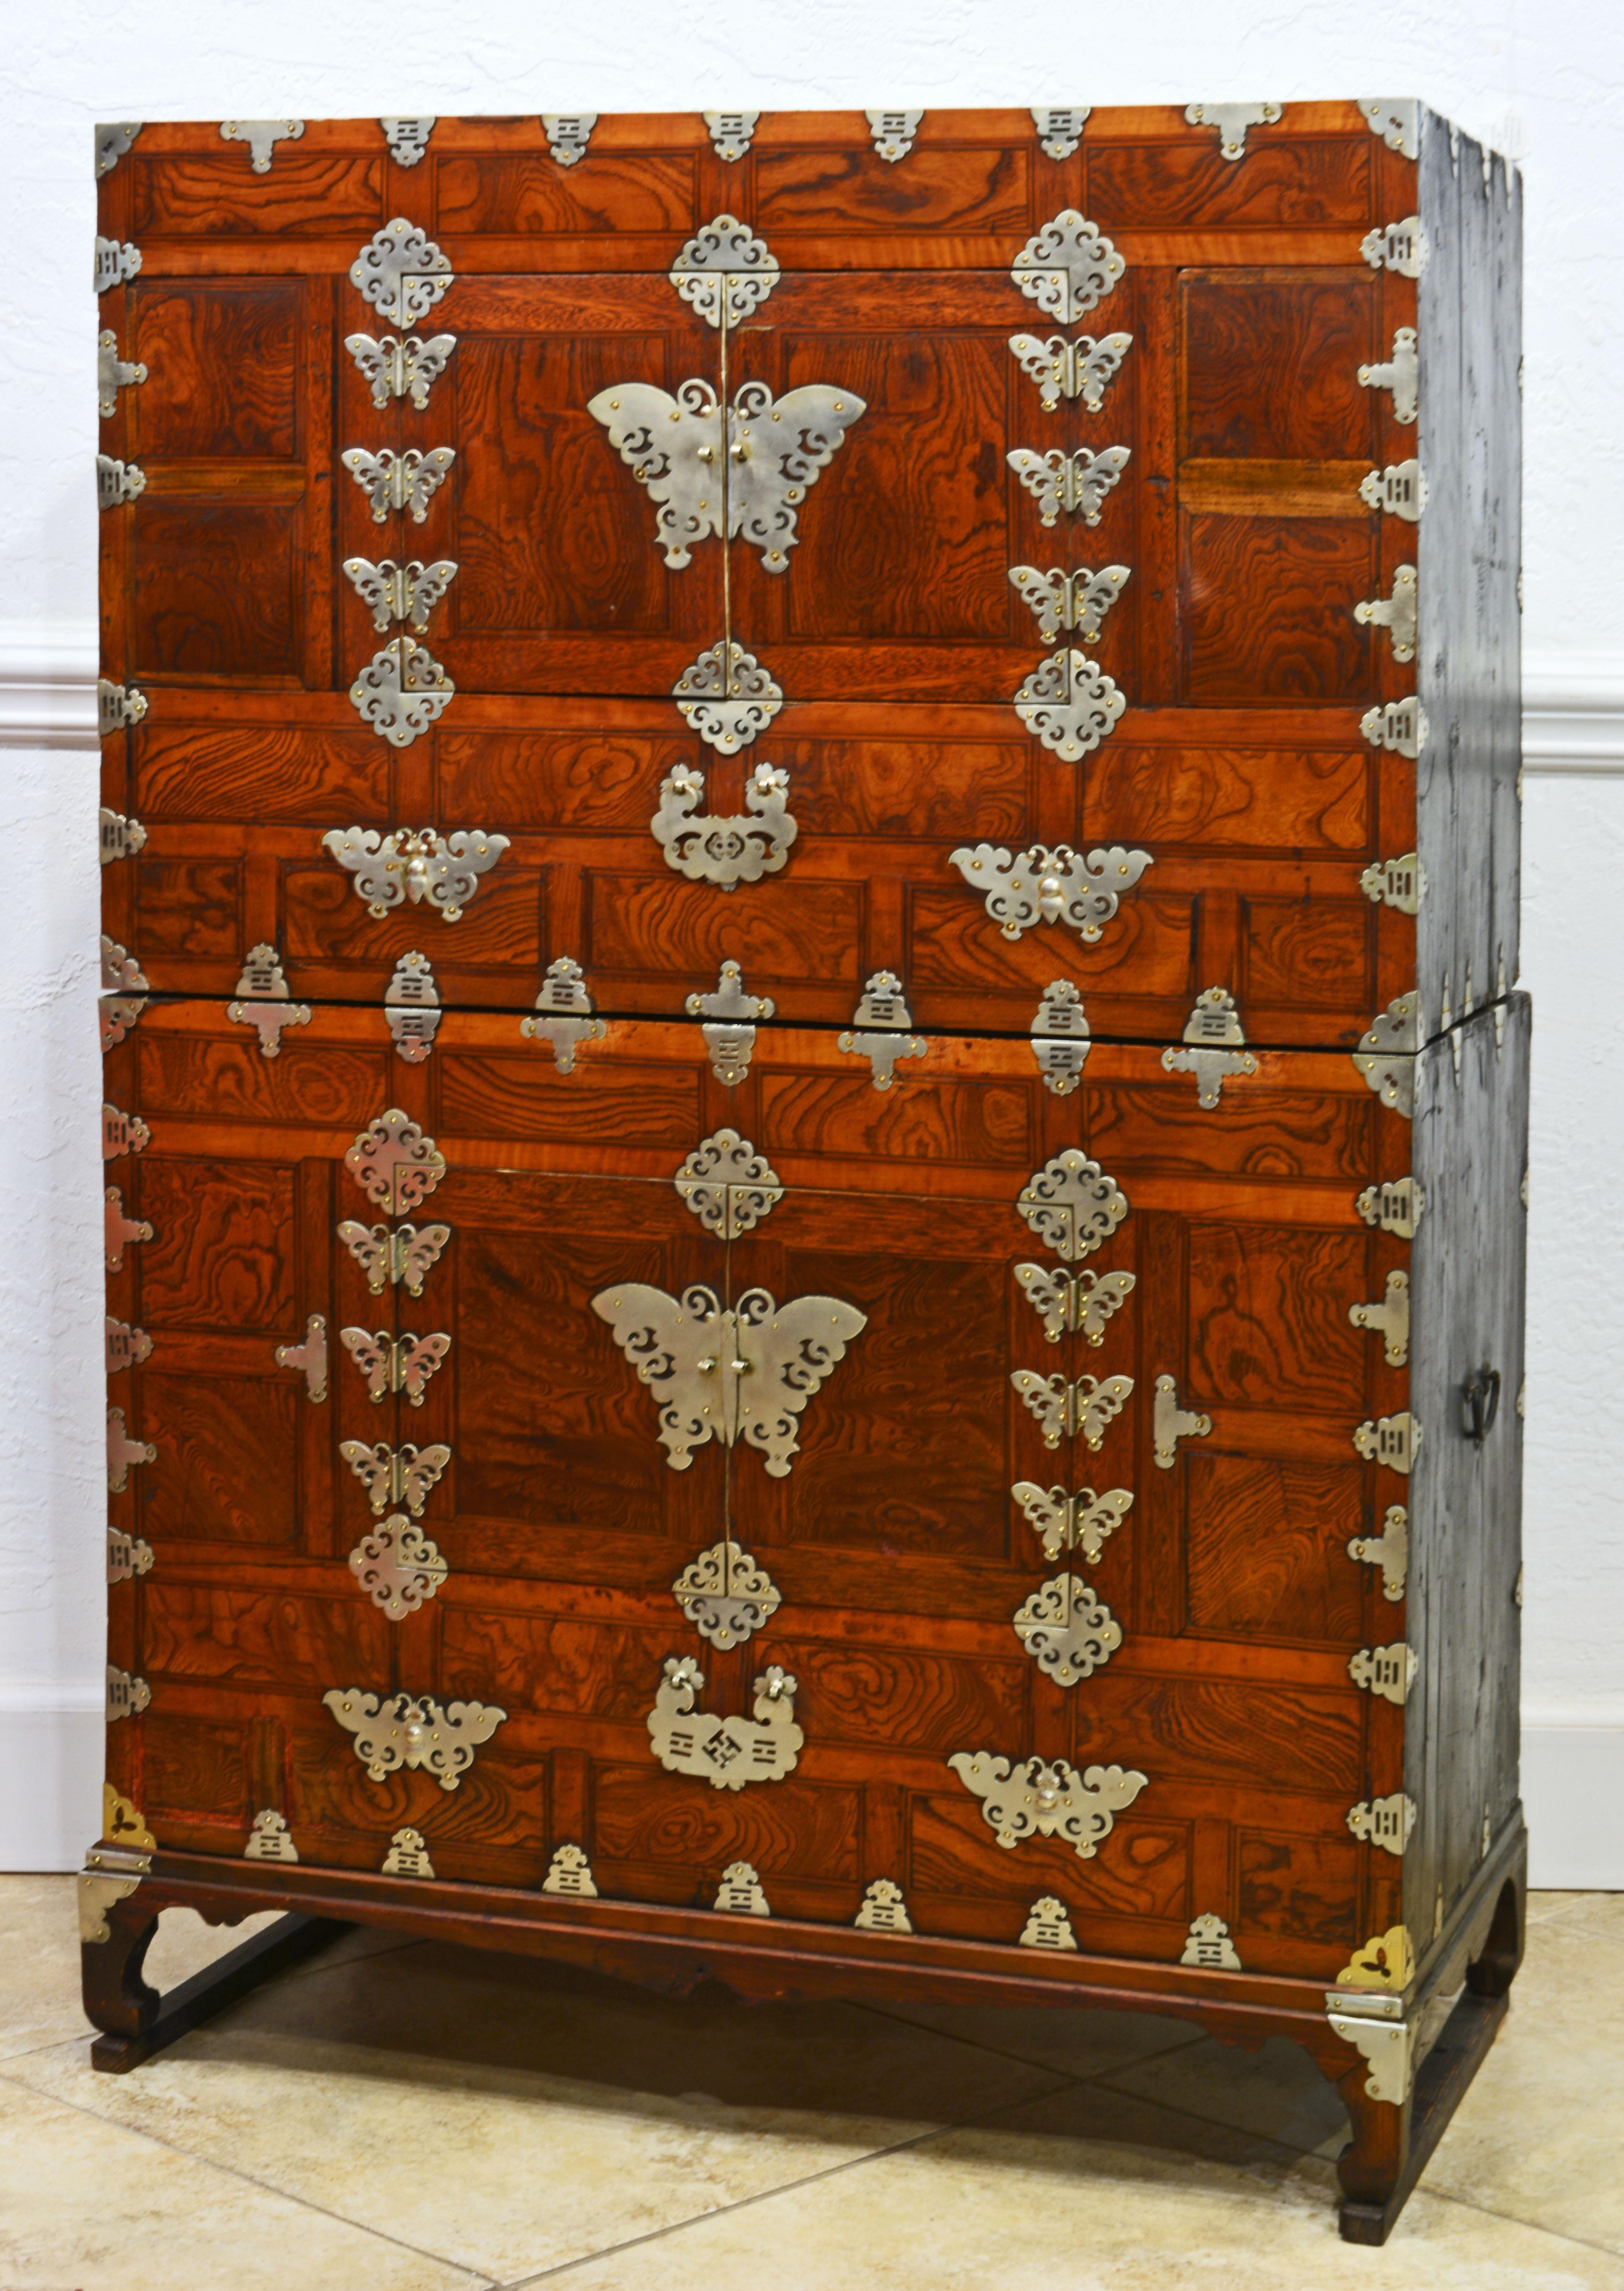 Both the upper and the lower part have multiple decorative white brass mounts. Each features two doors mounted with butterfly hinges and butterfly center-mount. The doors open up to paper lined interiors.